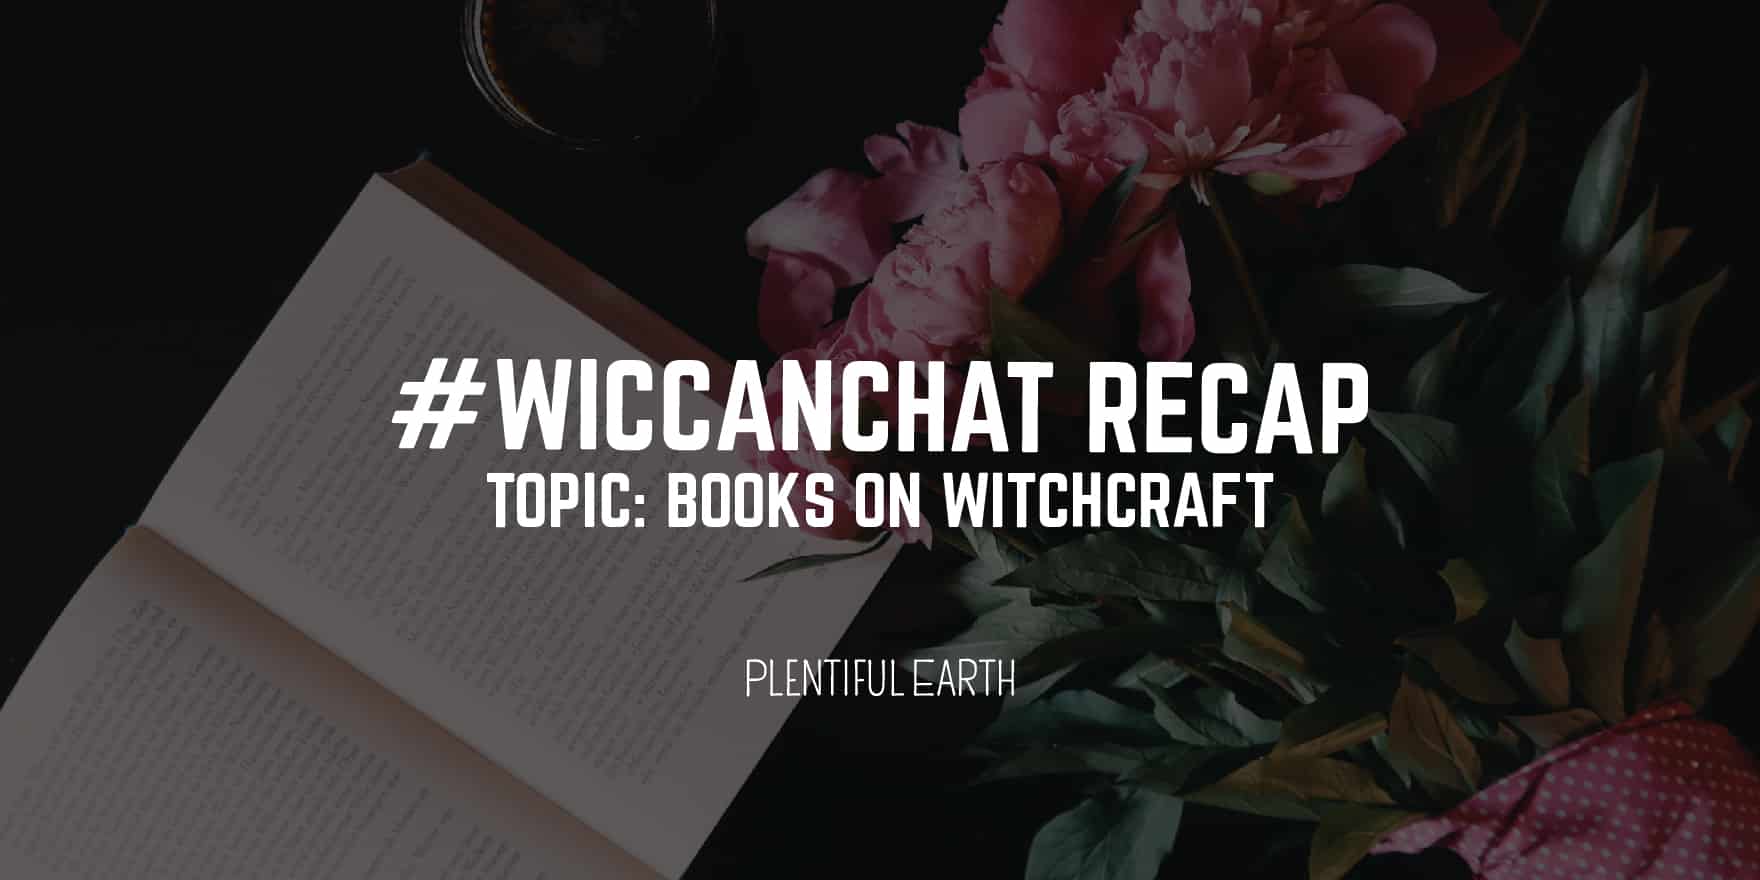 An open book surrounded by flowers and a cup of coffee, featuring a social media recap on the topic of "books on witchcraft", categorized as an exploration into the occult.